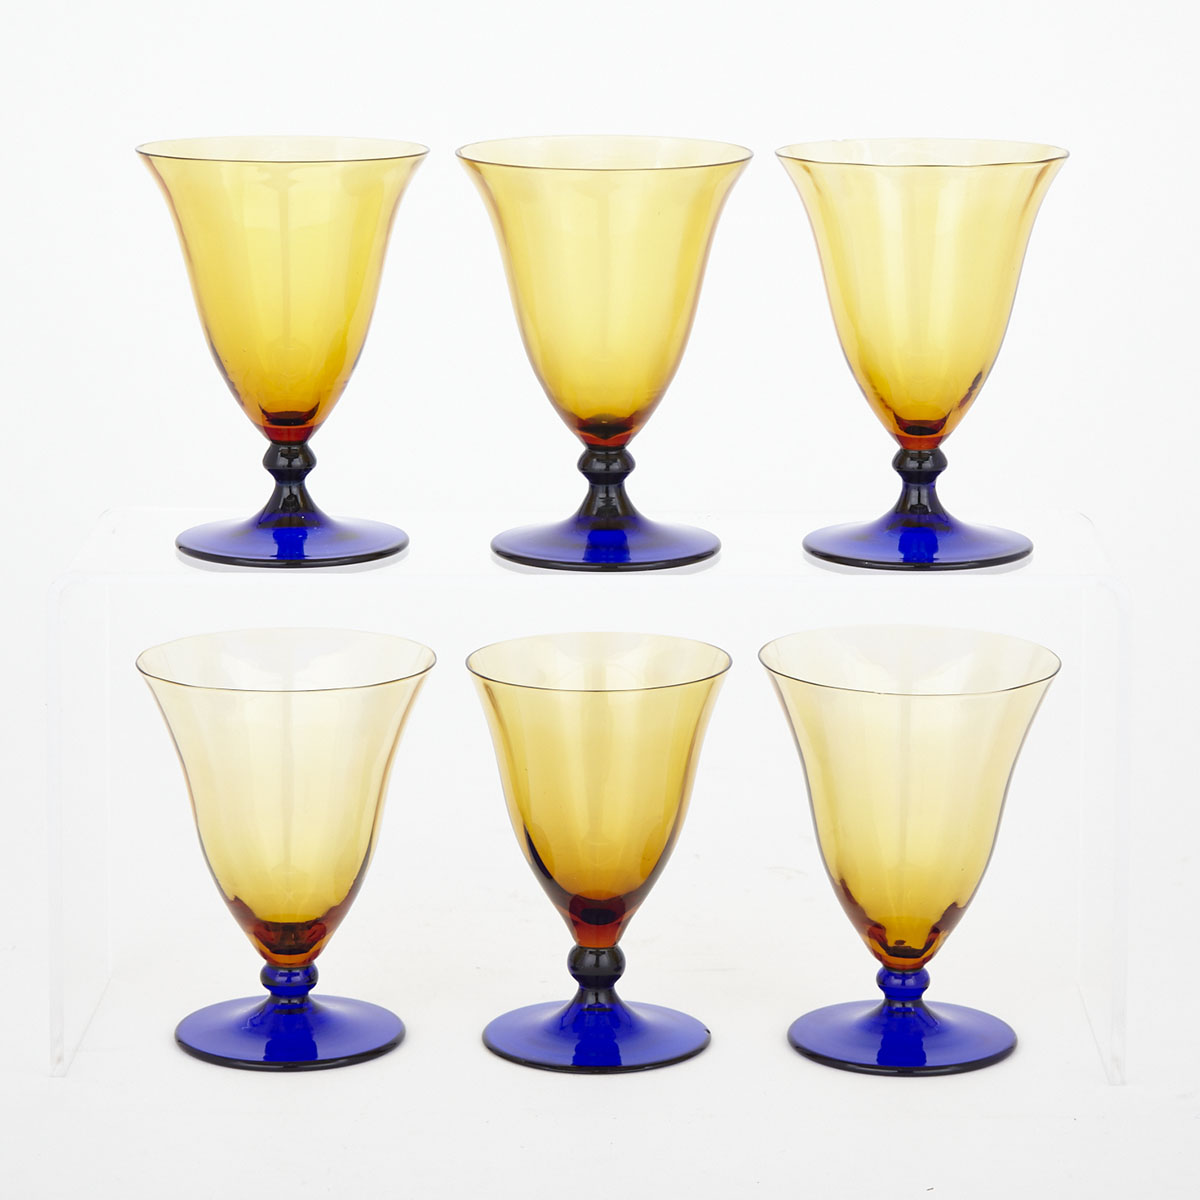 Six Steuben Blue and Amber Drinking Glasses, early 20th century